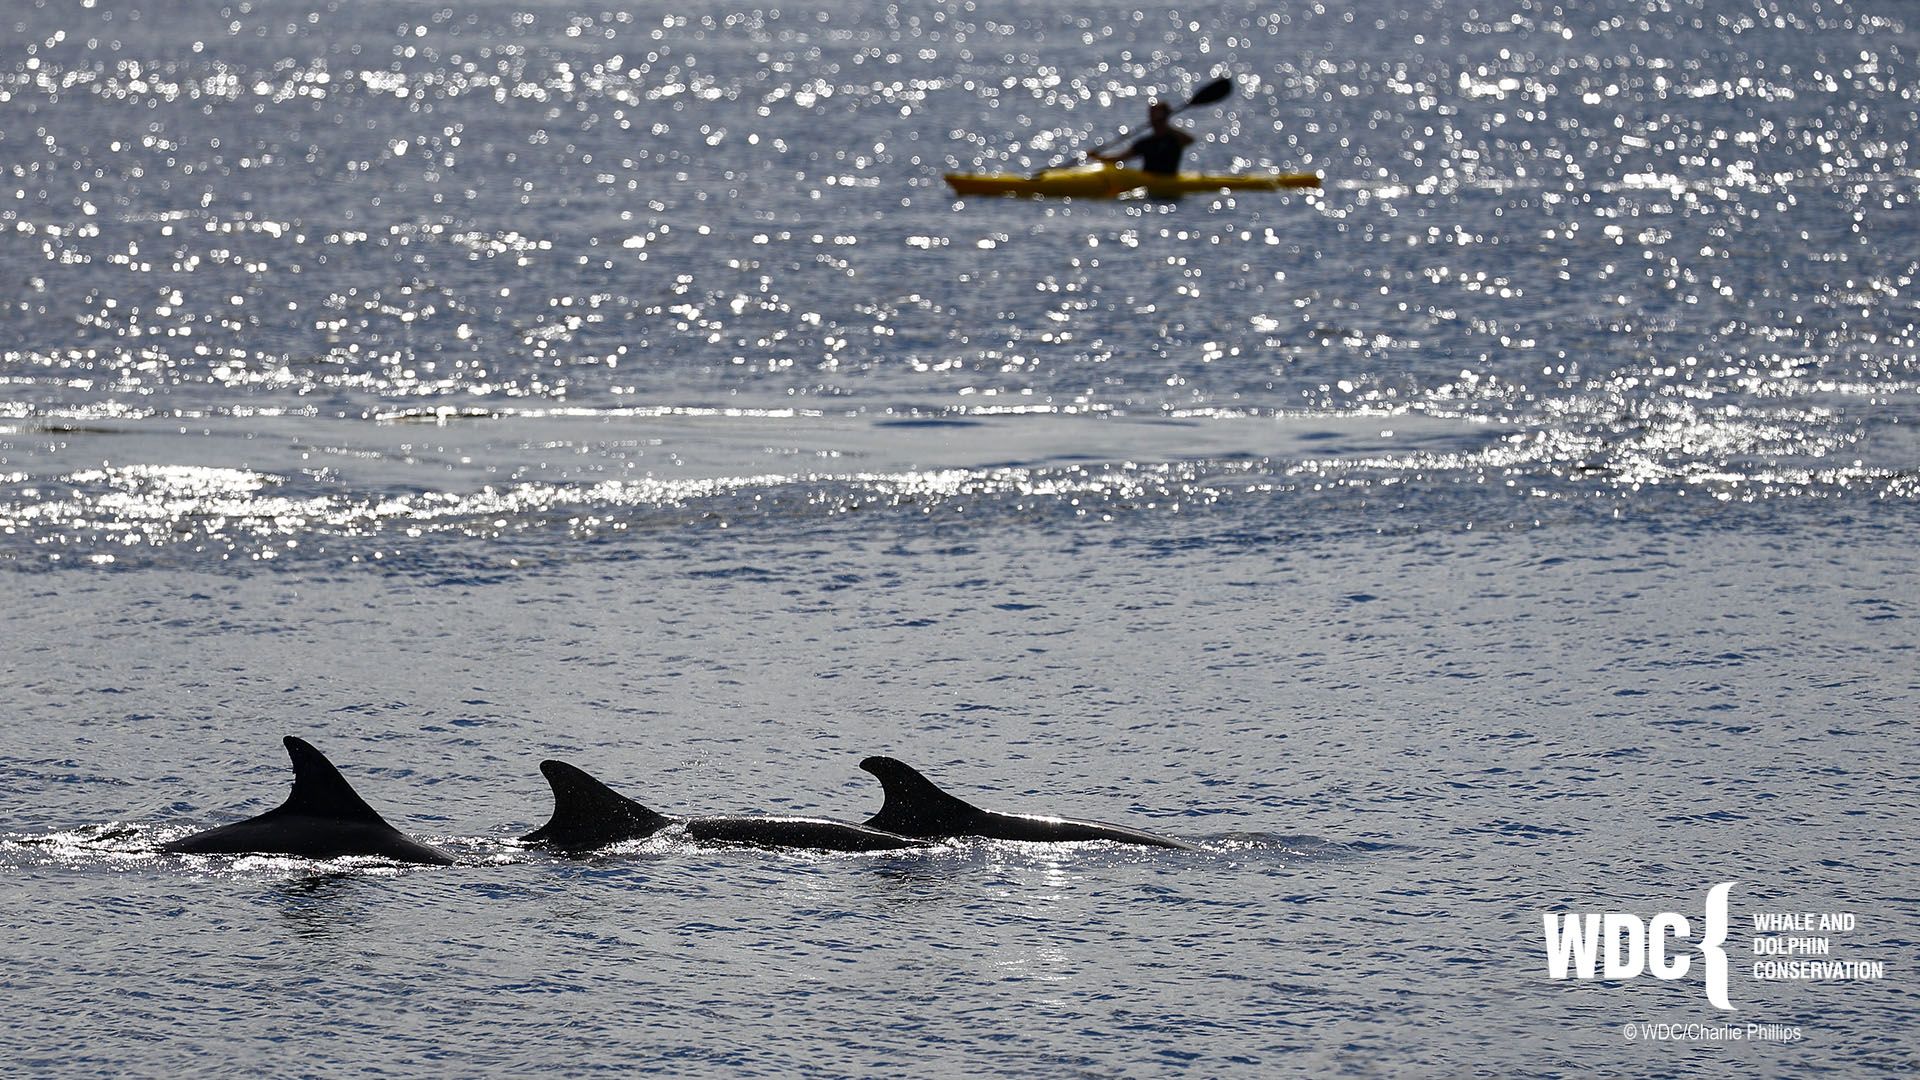 A picture of a kayak near dolphins swimming